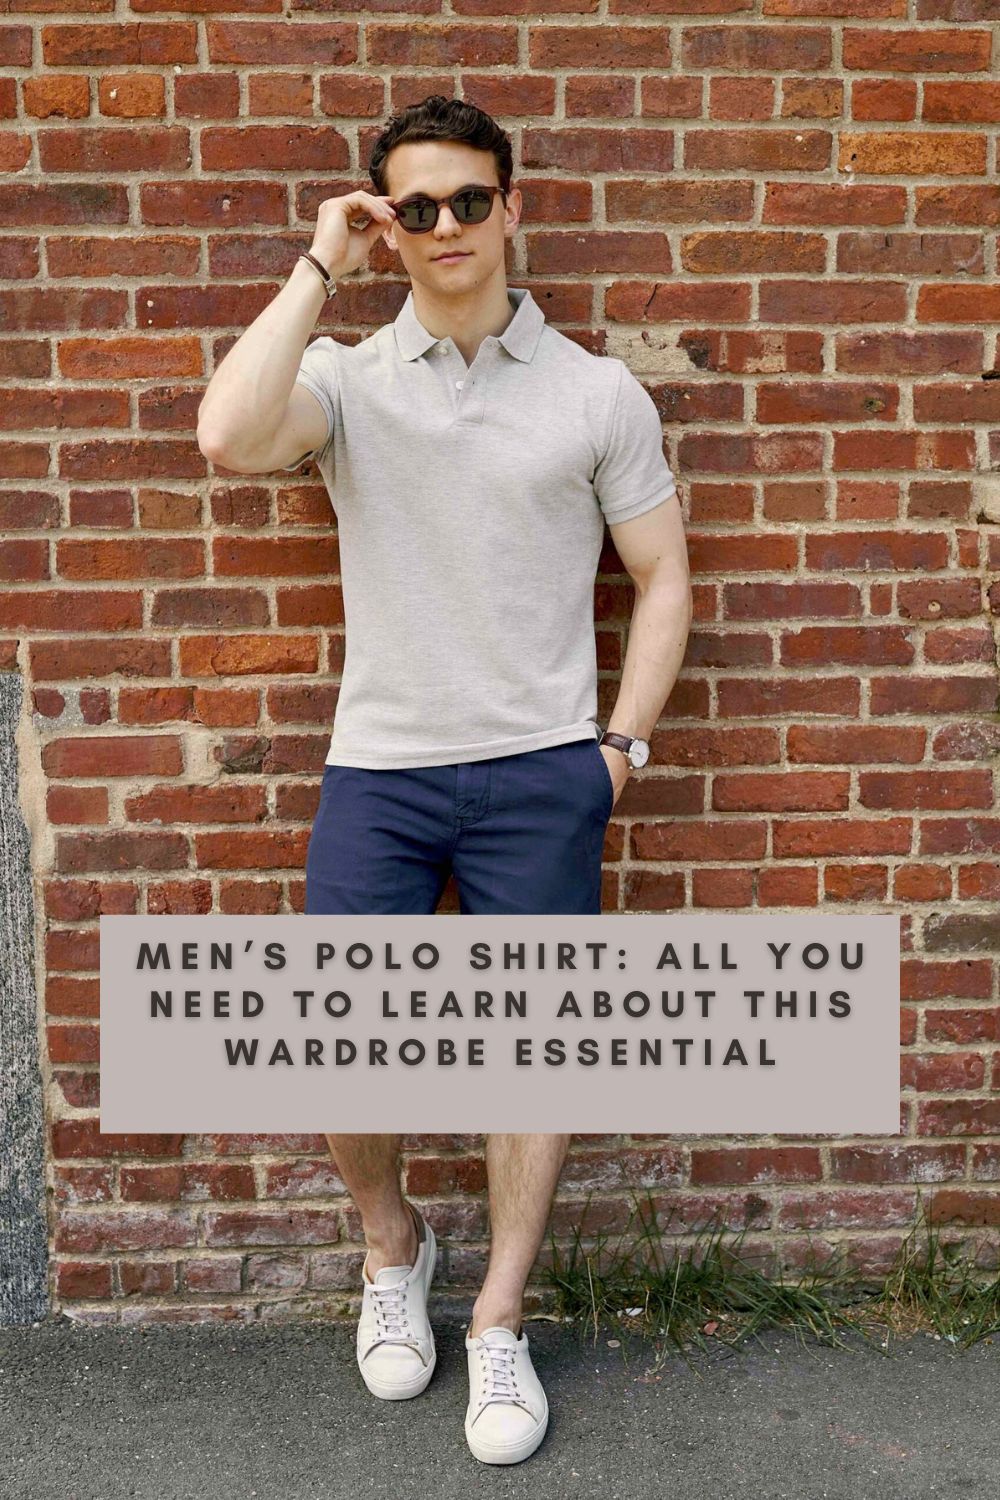 Men’s Polo Shirt: All You Need to Learn About this Wardrobe Essential